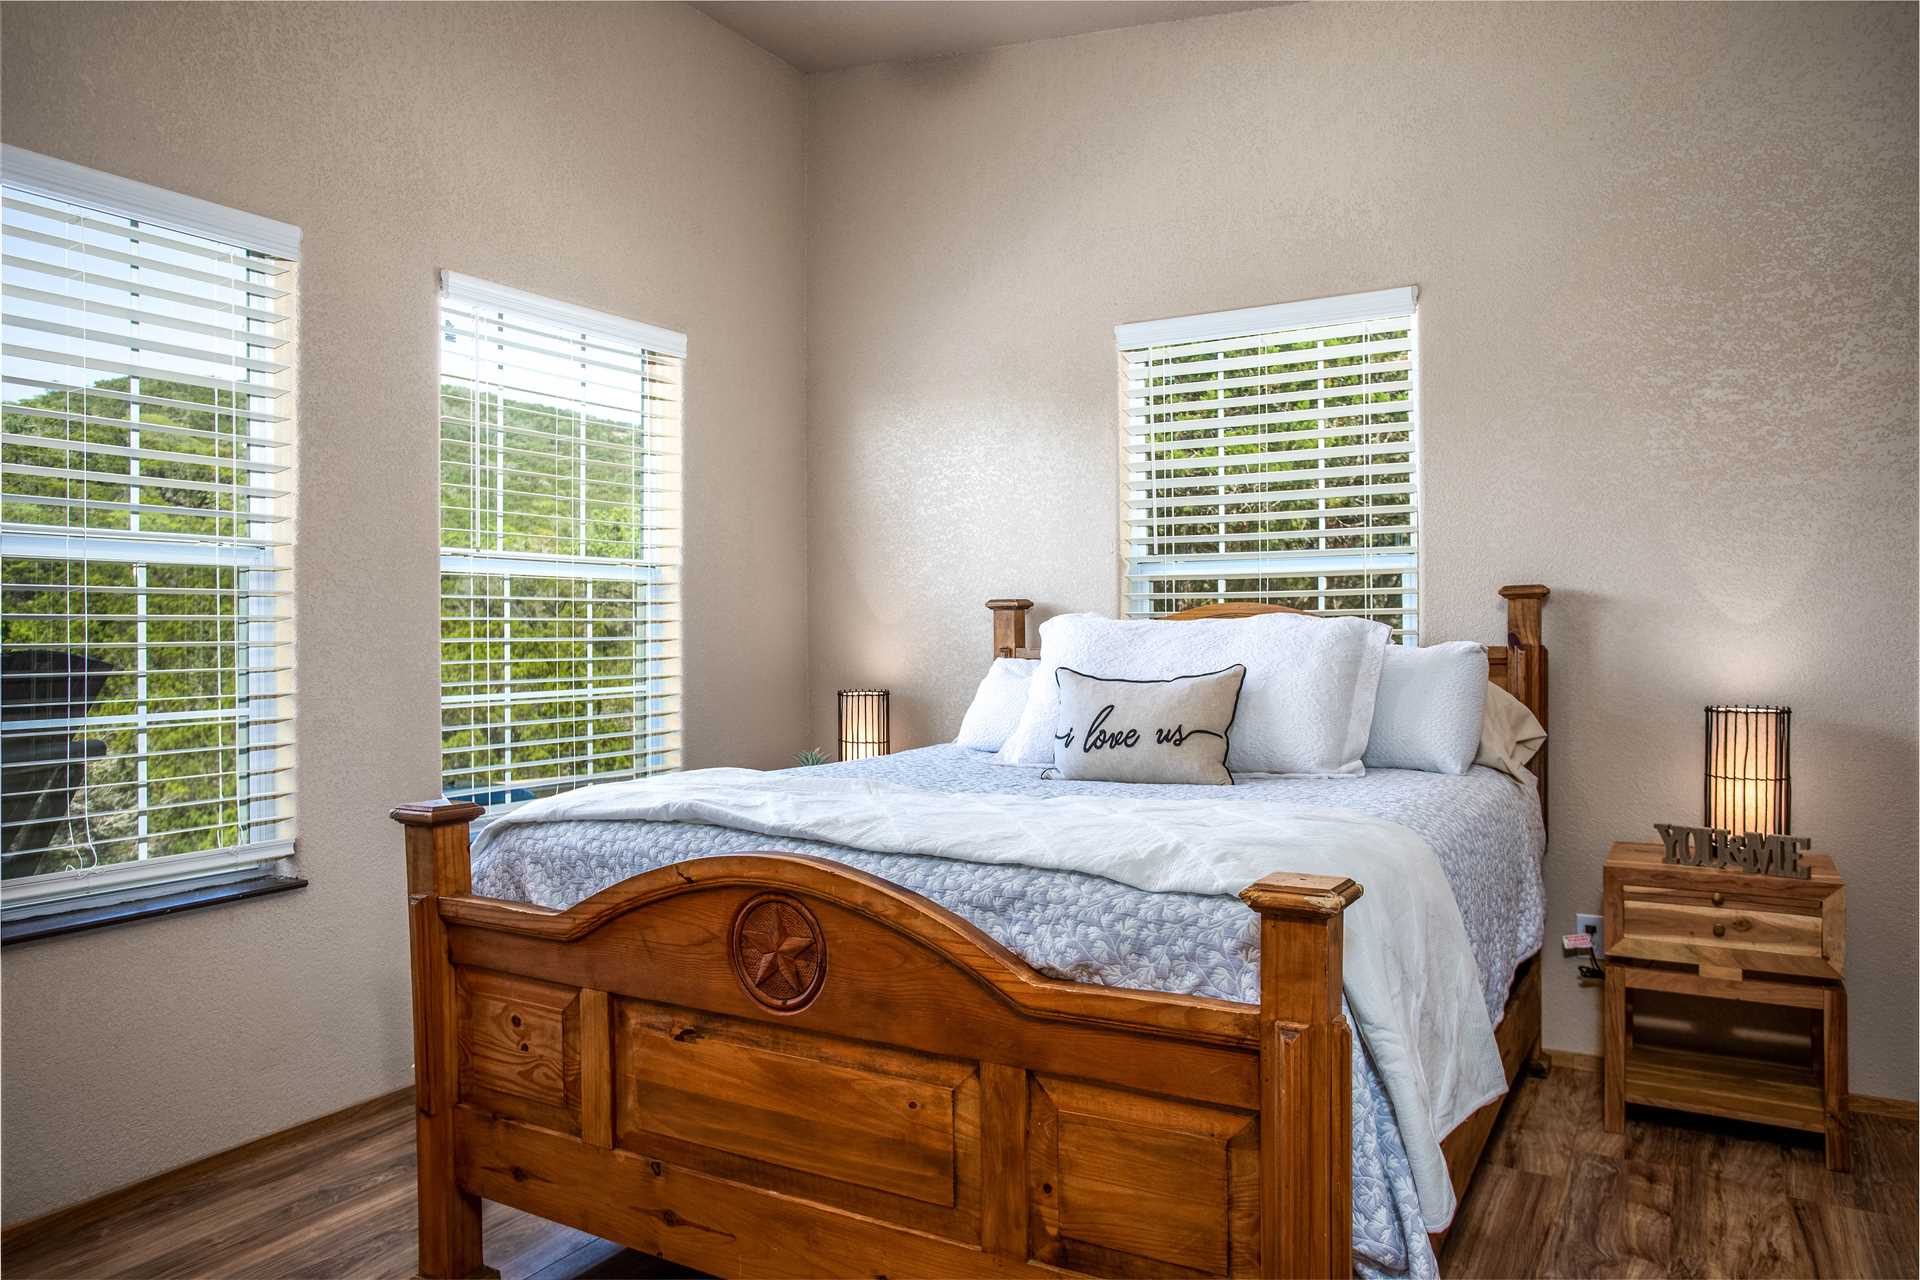                                                 Our guests love the warm and welcoming wood-framed queen-sized bed, and the bedroom windows that let in natural light, too!